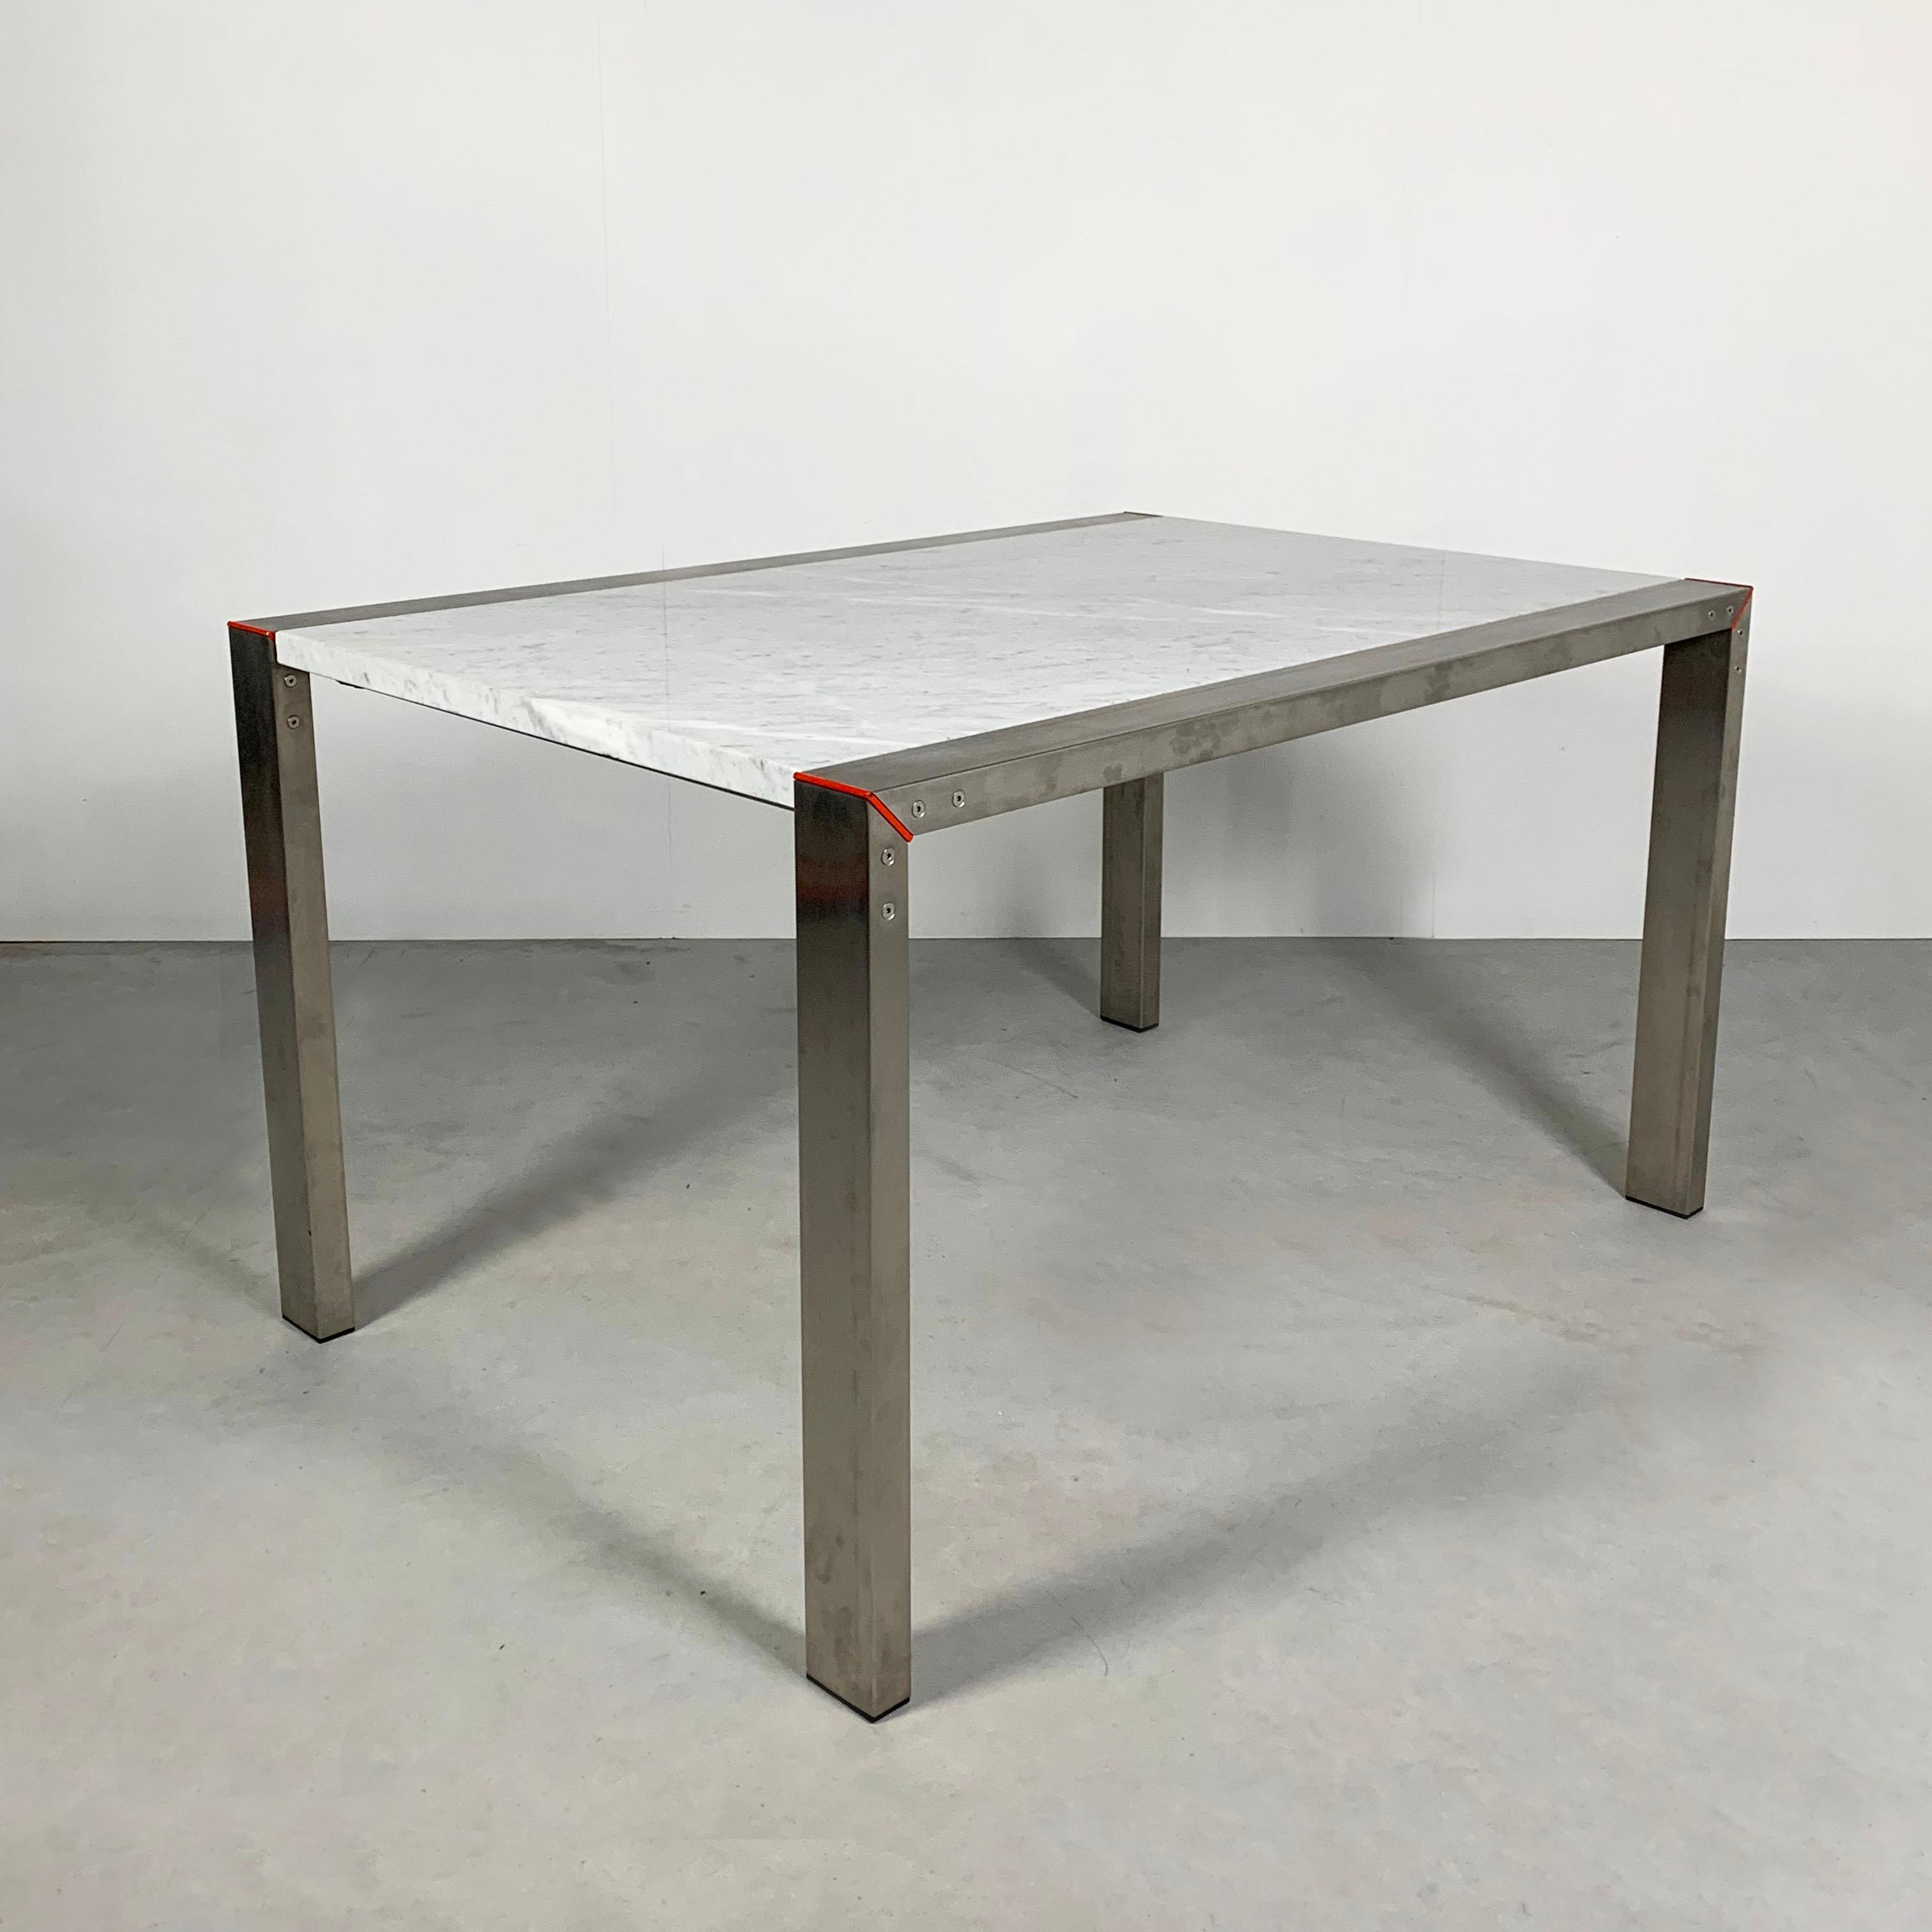 Etra marble dining table by Gae Aulenti for Snaidero, 1990s
Designer - Gae Aulenti
Producer - Snaidero
Model - Etra Dining Table
Design Period - Nineties
Measurements - width 130 cm x depth 92 cm x height 73 cm
Materials - Marble, Metal
Color